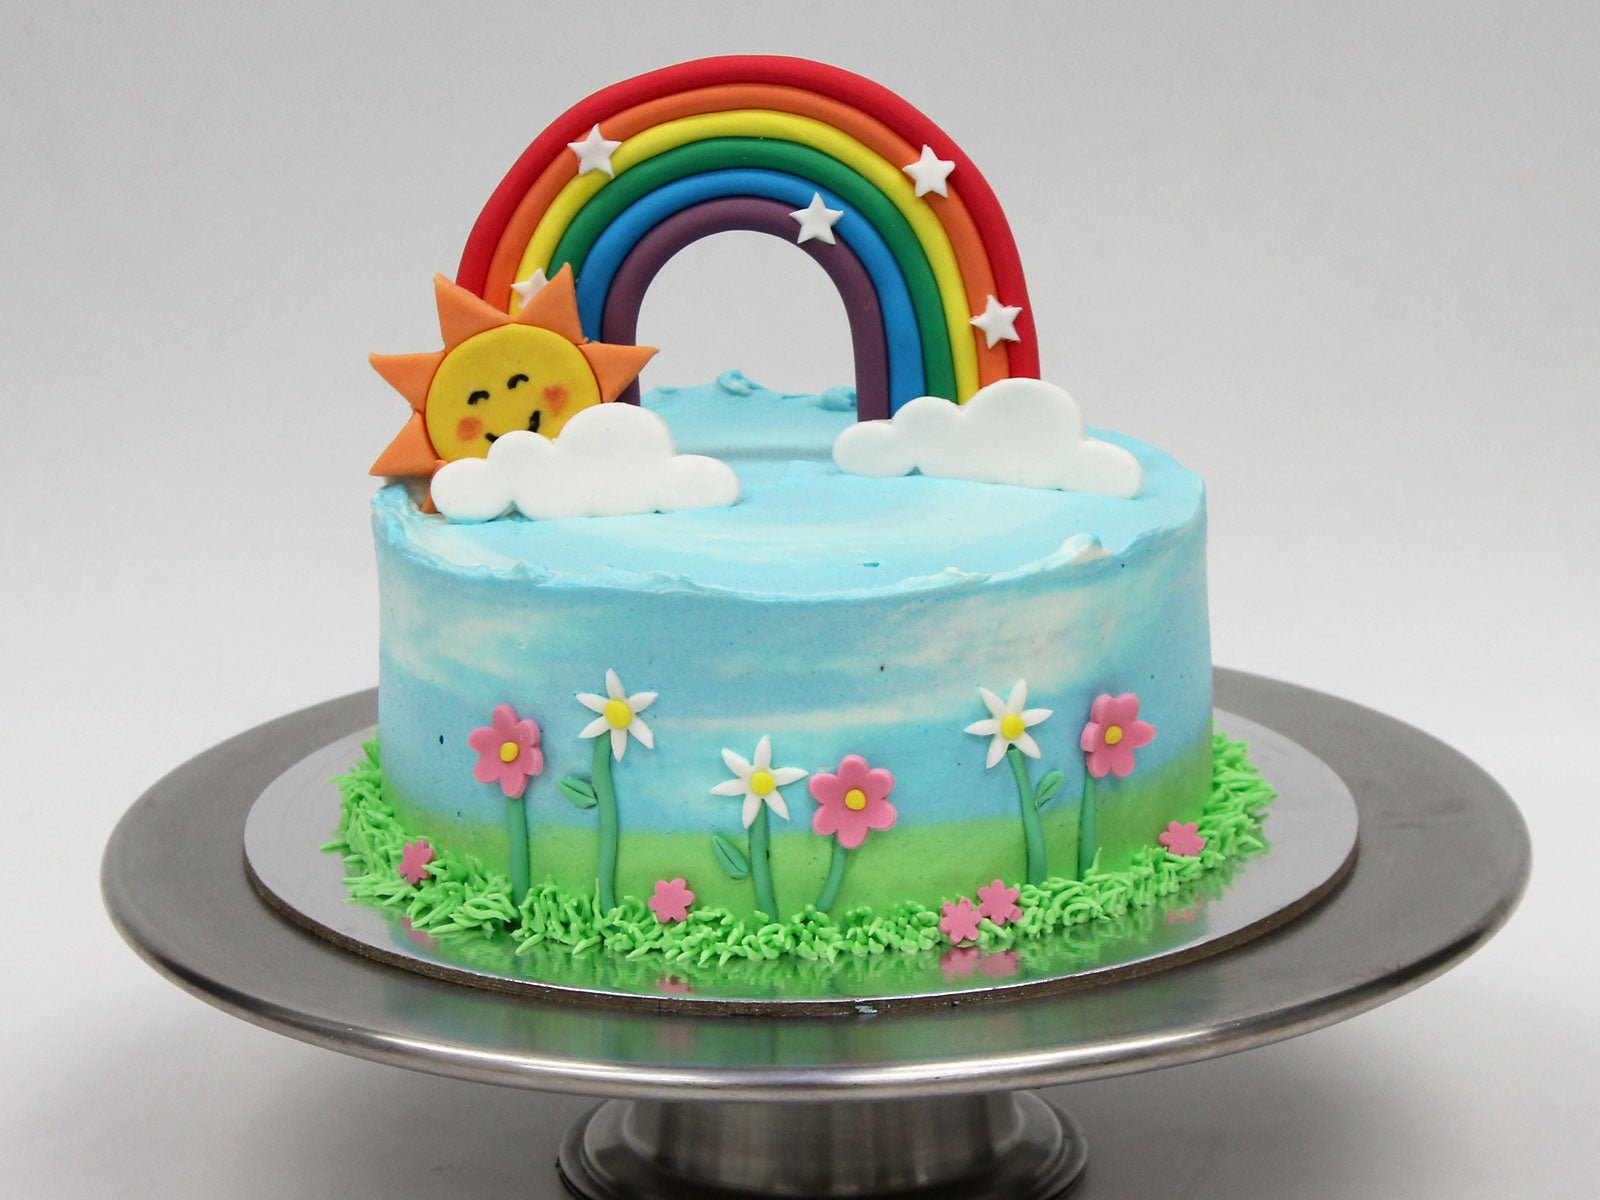 Custom Kids Birthday Cakes! | Baked by Susan | Planning for a Big Day